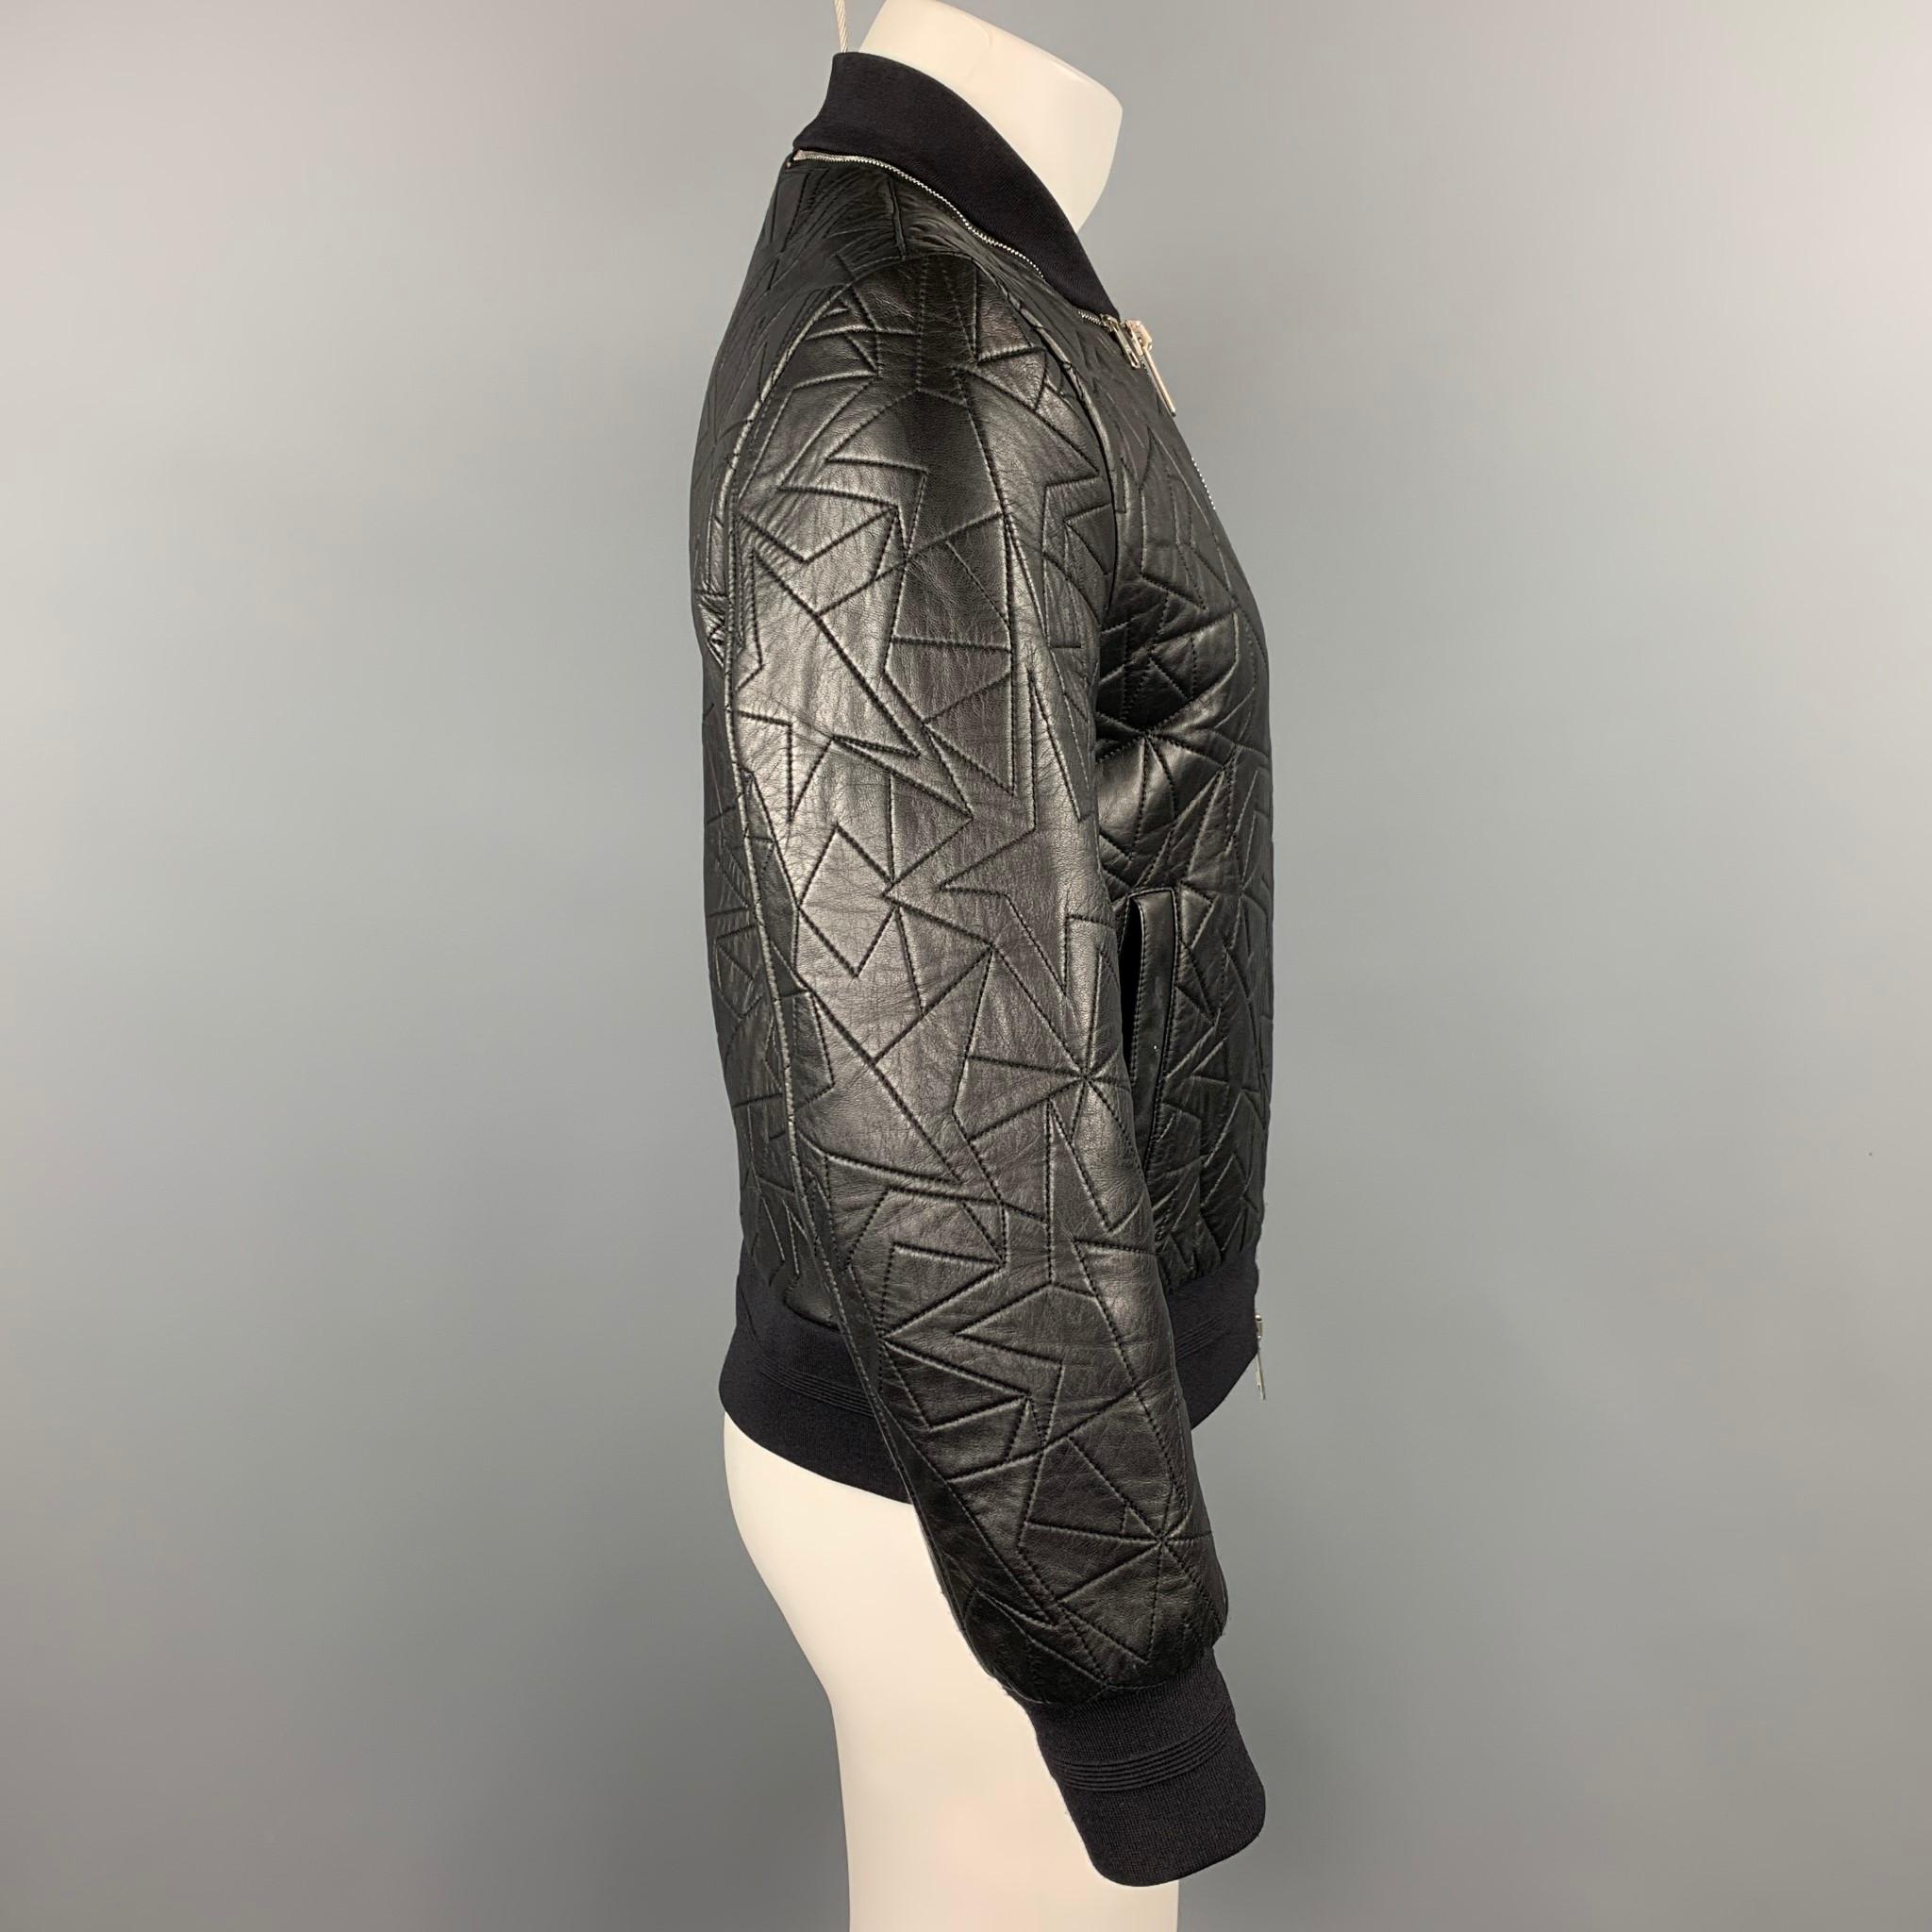 NEIL BARRETT jacket comes in a black quilted leather with a full liner featuring a bomber style, skinny fit, zipper details, slit pockets, and a full zip up closure. Made in Italy.

Excellent Pre-Owned Condition.
Marked: S

Measurements:

Shoulder: